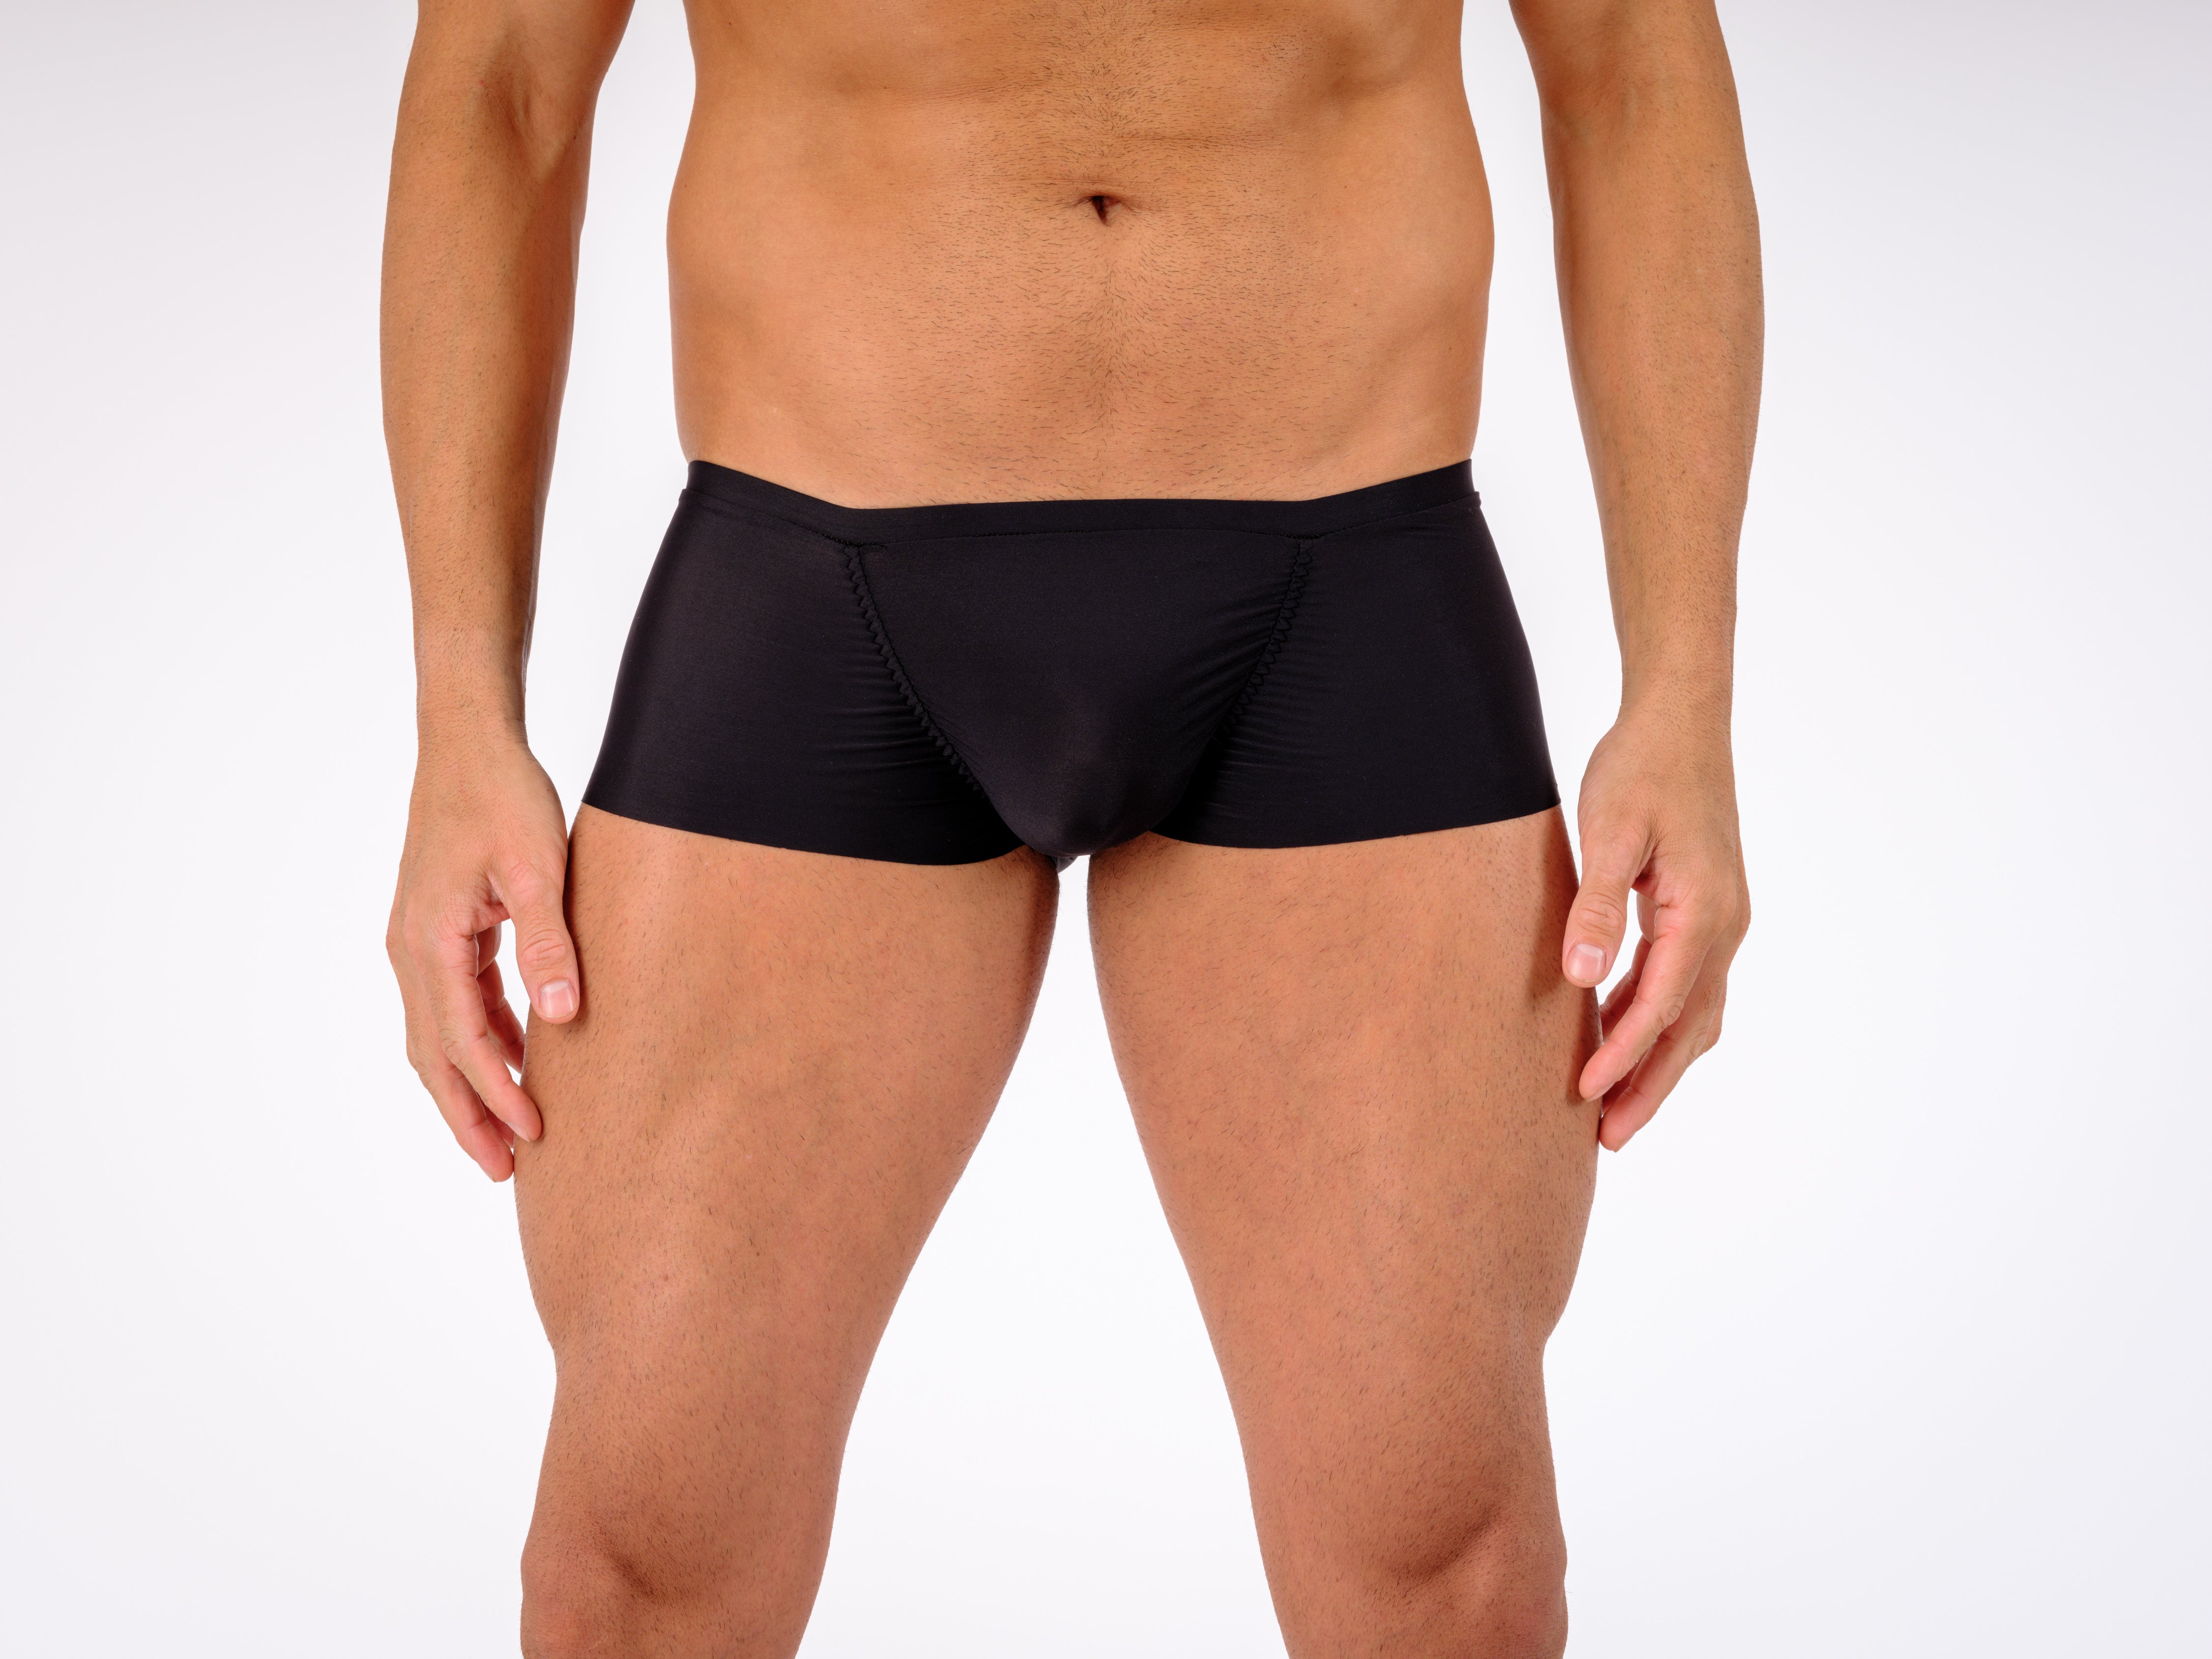 male torso wearing tight black sexy boxer shorts by Moot Lingerie